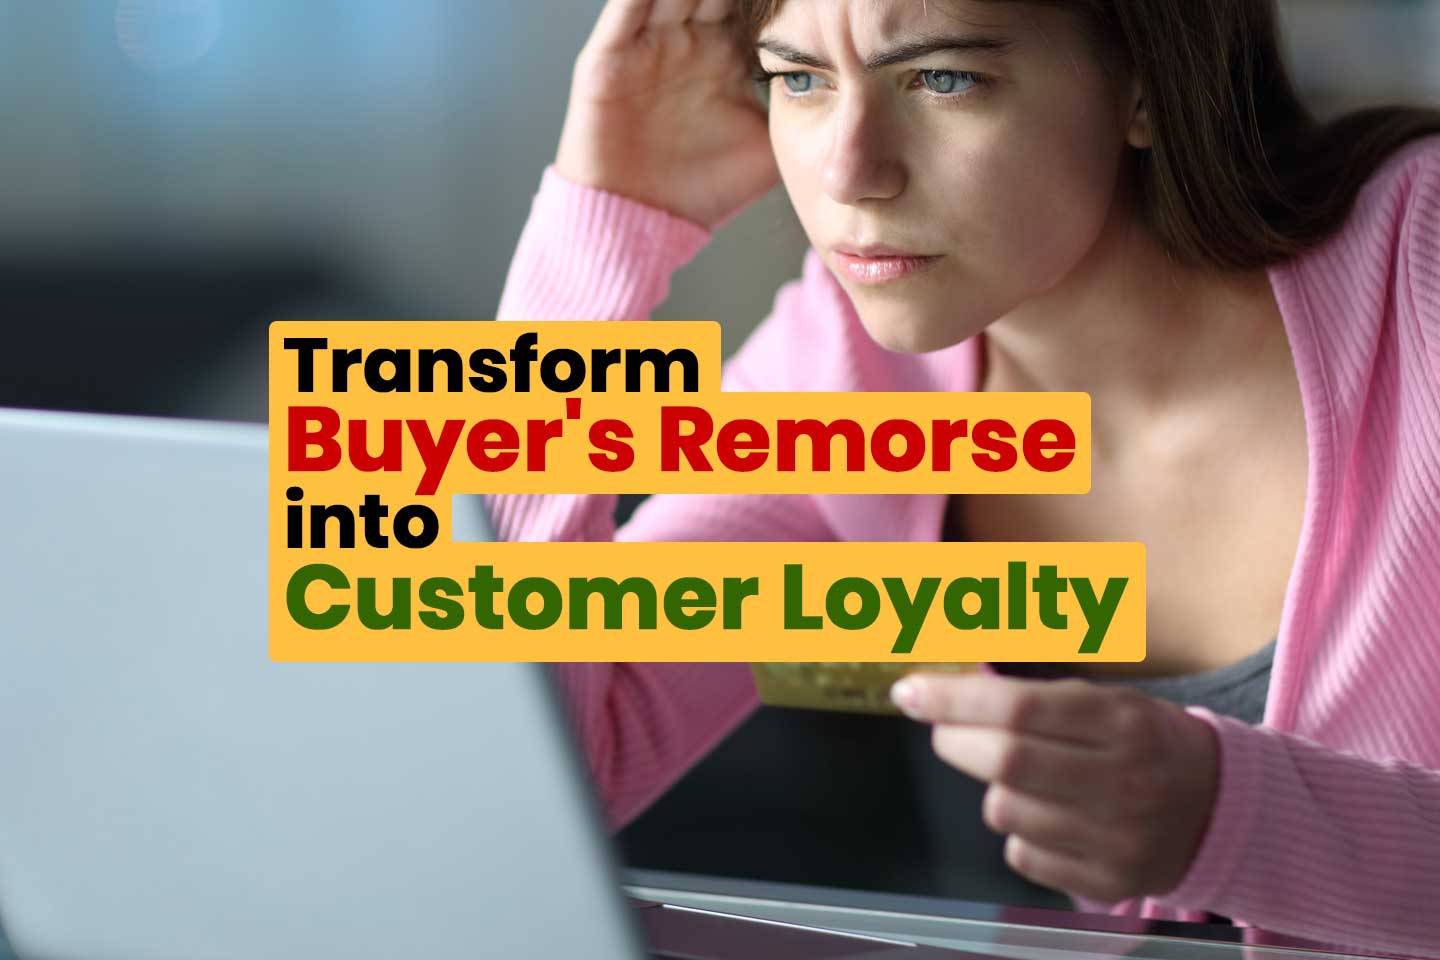 Reduce Buyers Remorse With These Simple Steps WISMOlabs